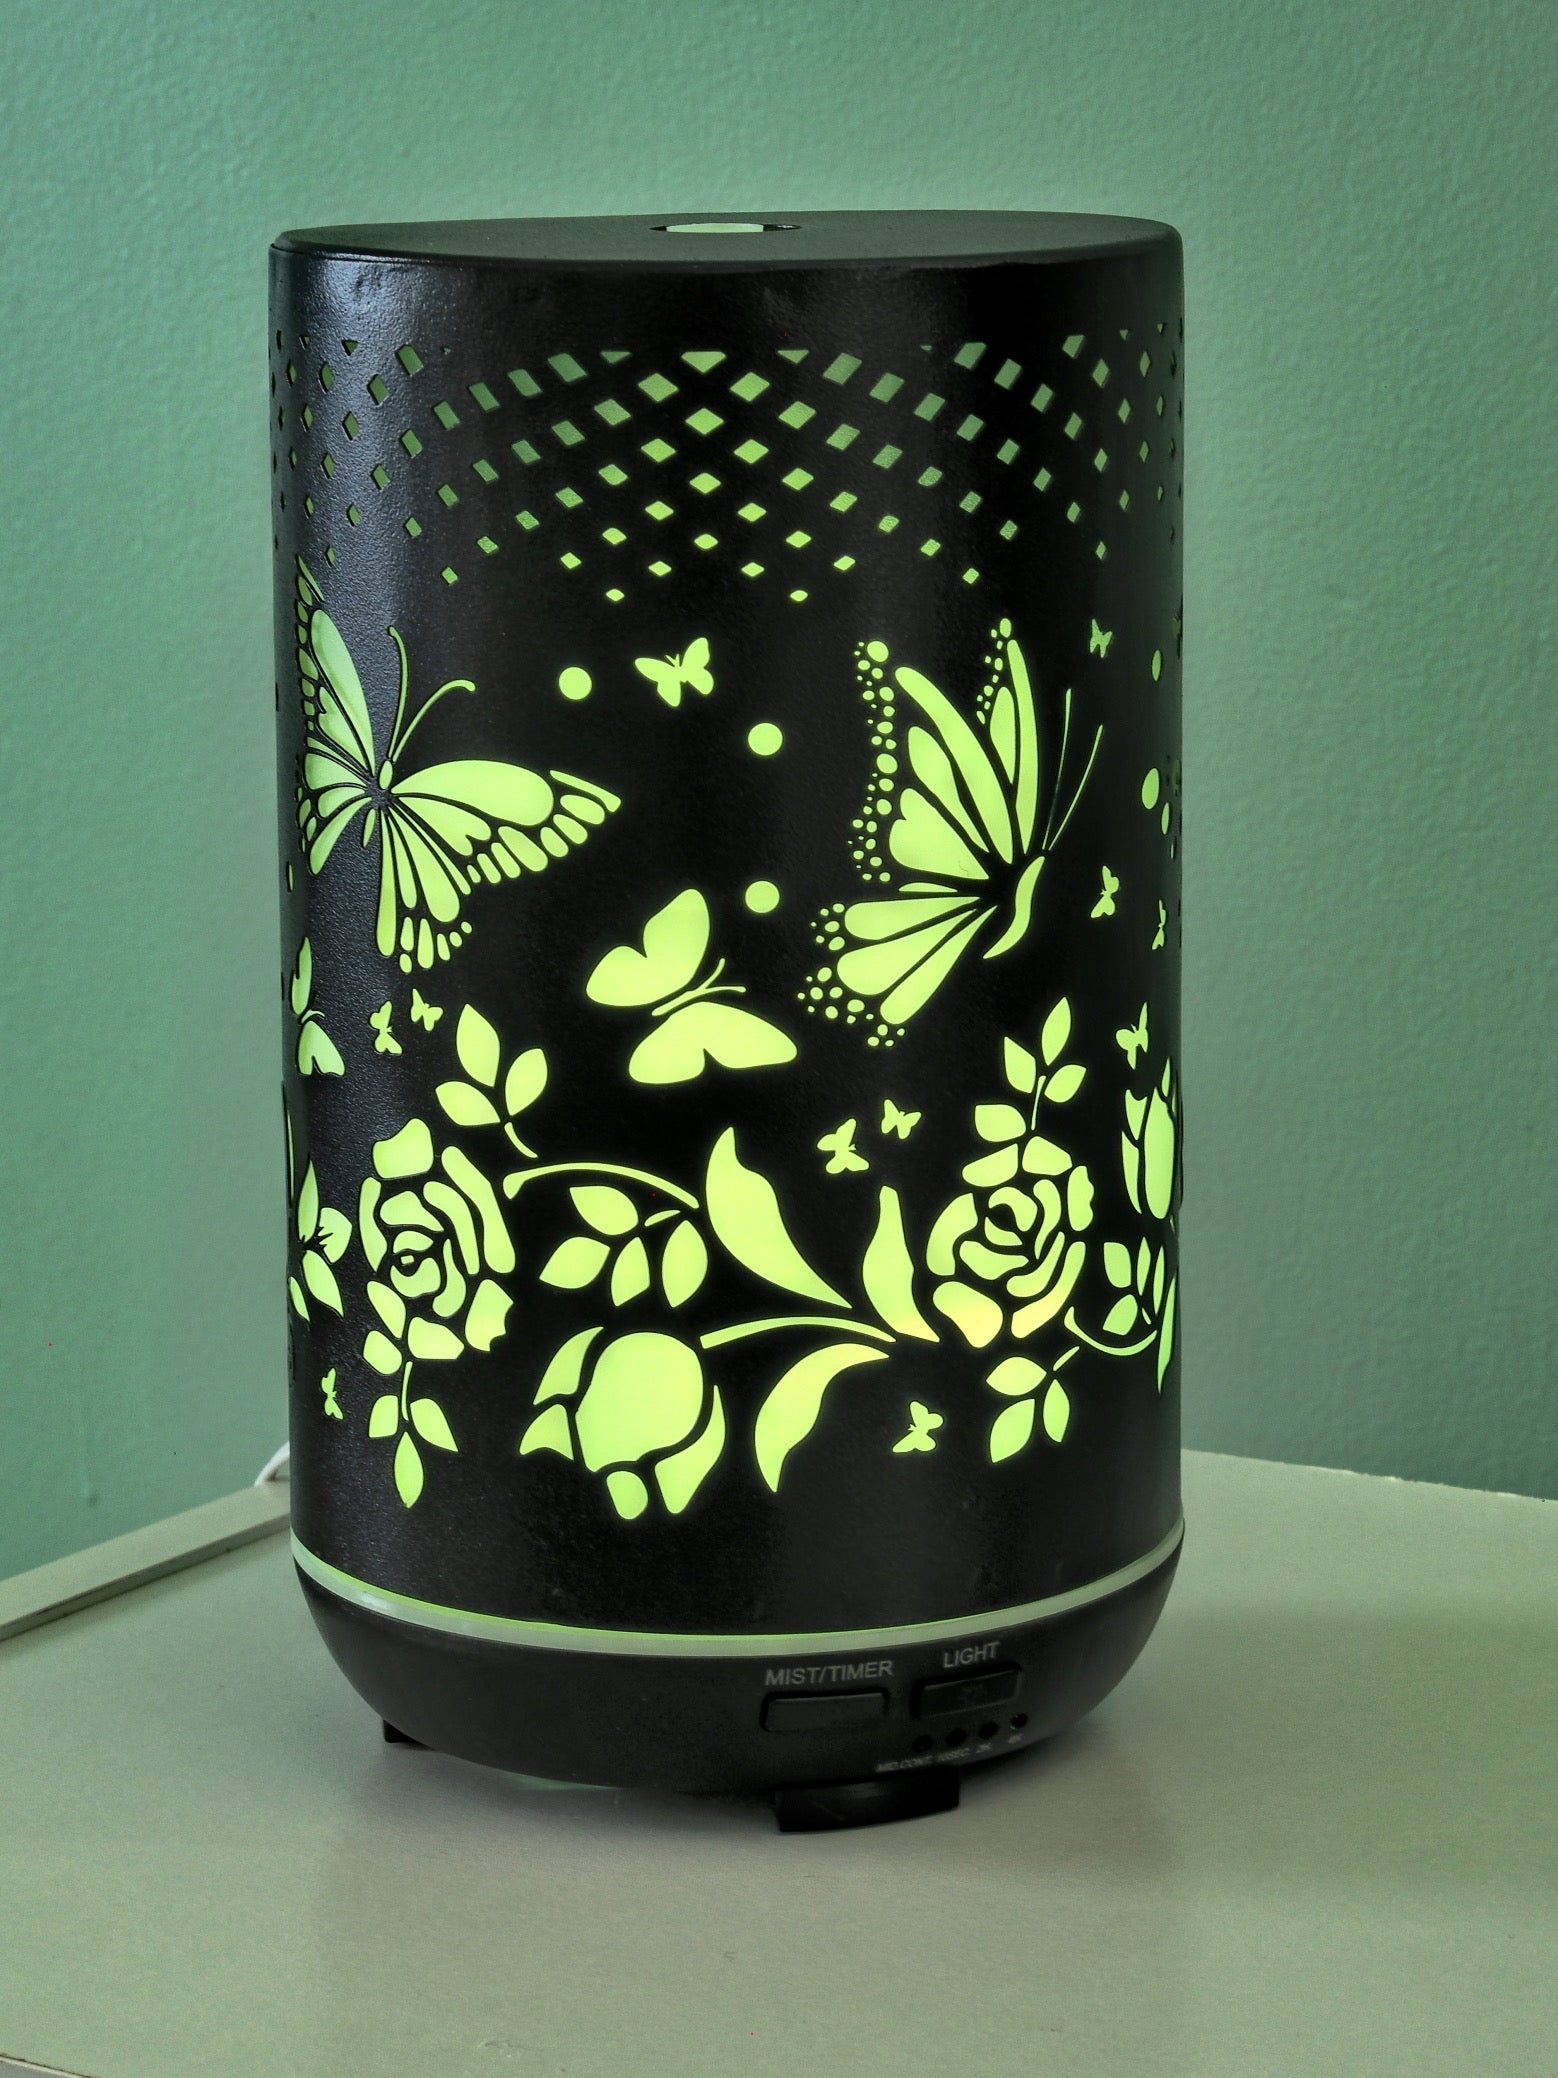 Floral Wellness Diffuser - Aromatherapy with Butterflies and Roses by Ancient Infusions.